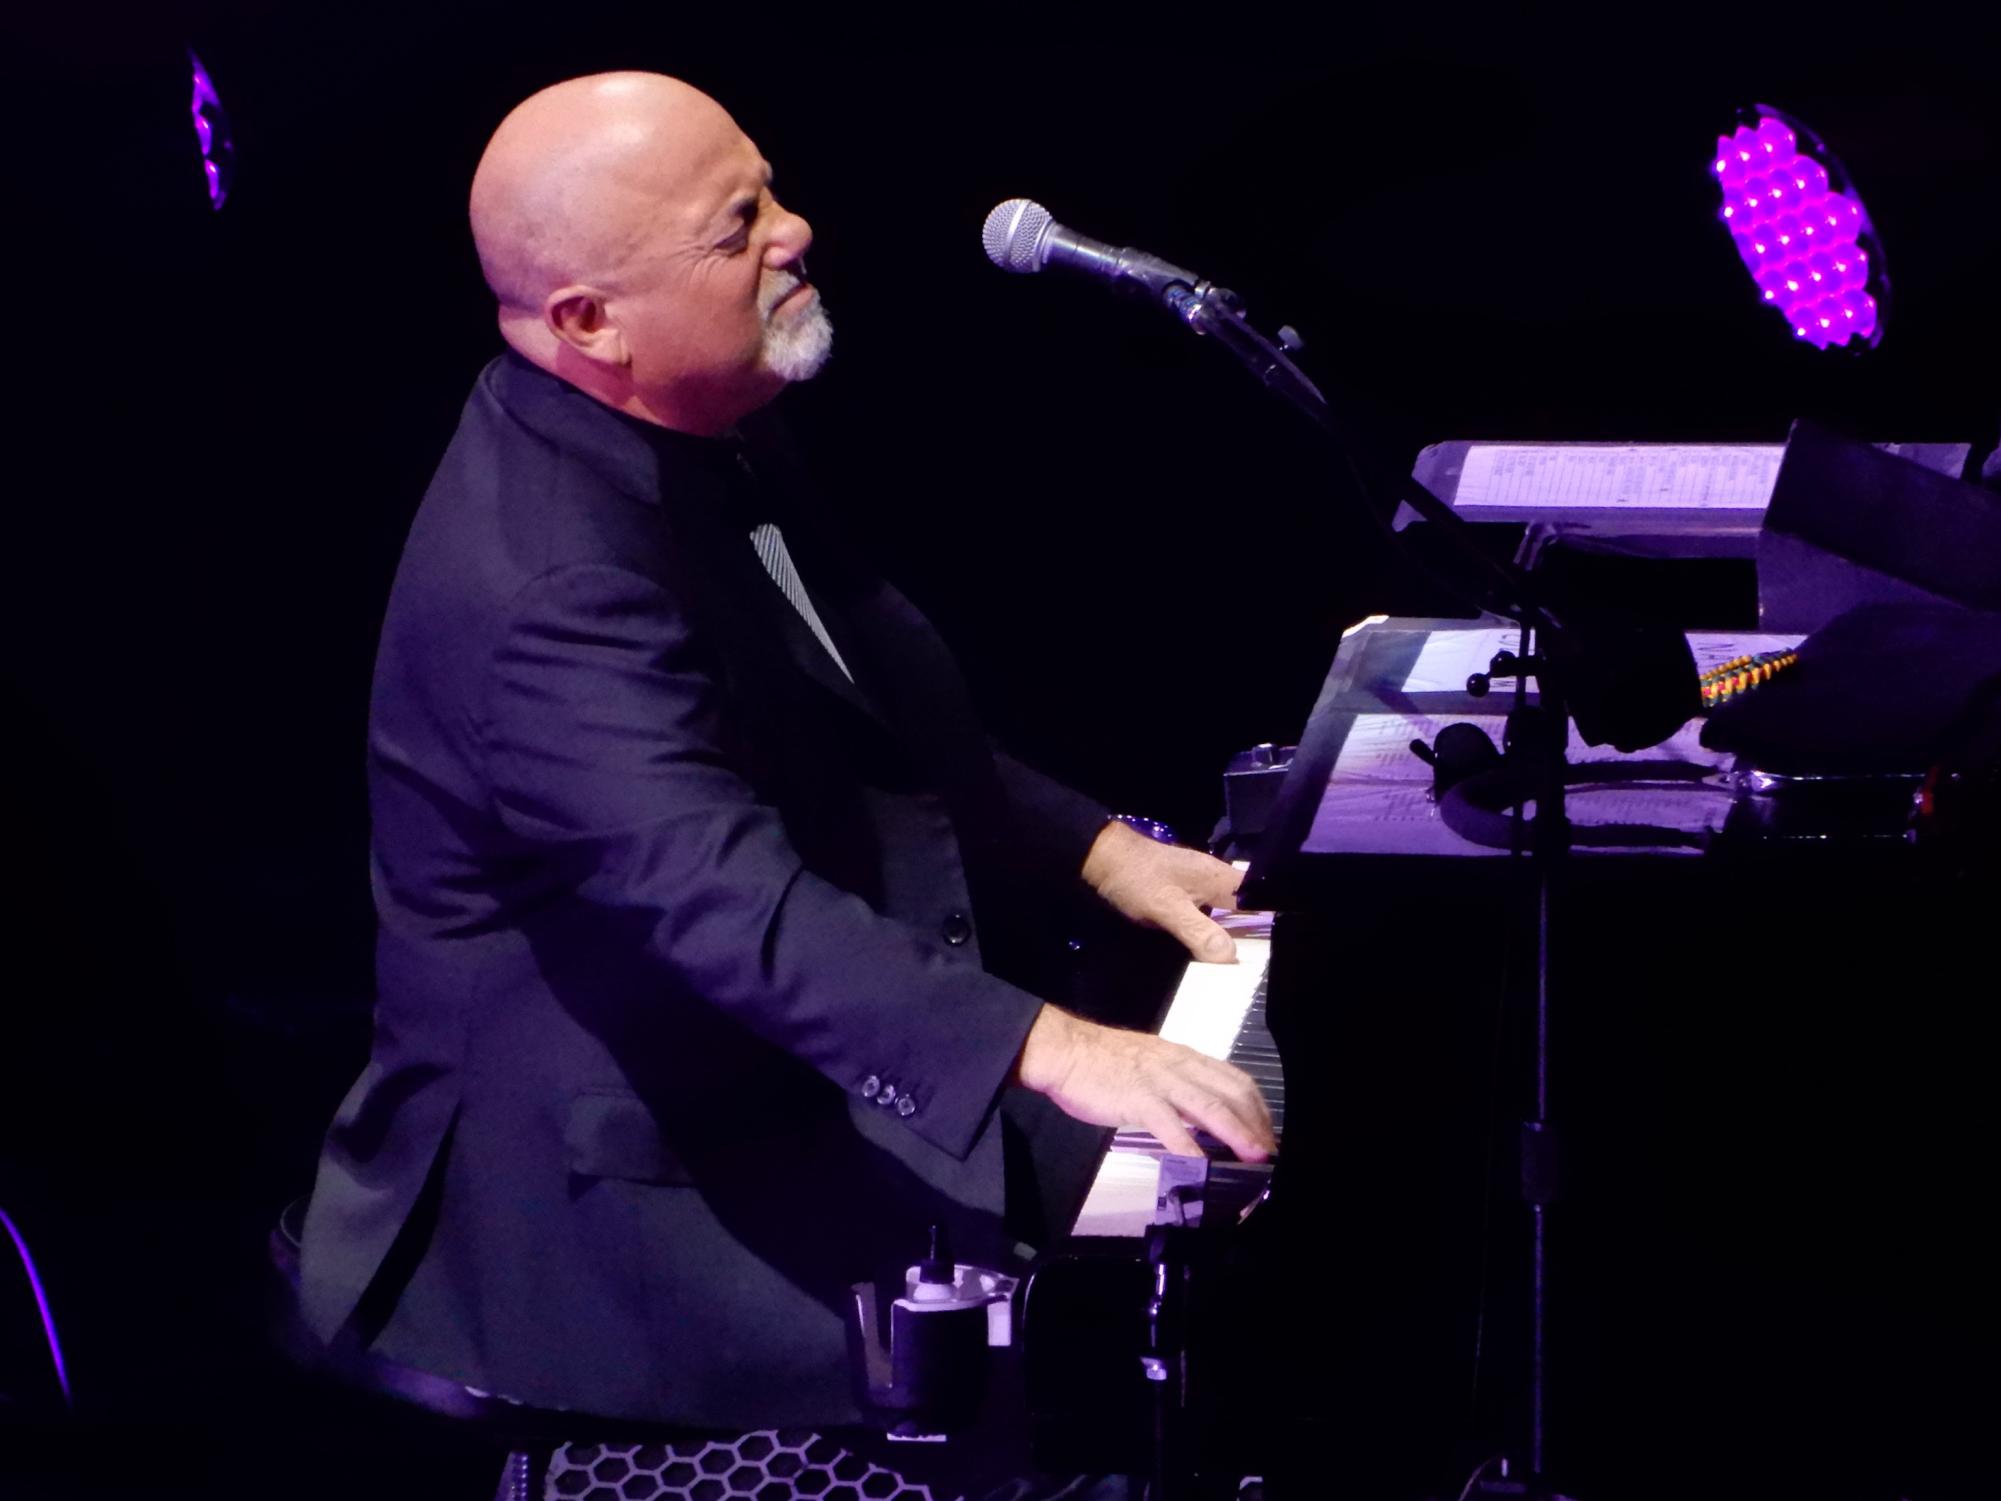 Backstory: Billy Joel. We Didn't Start the Fire – Onstage Magazine.com